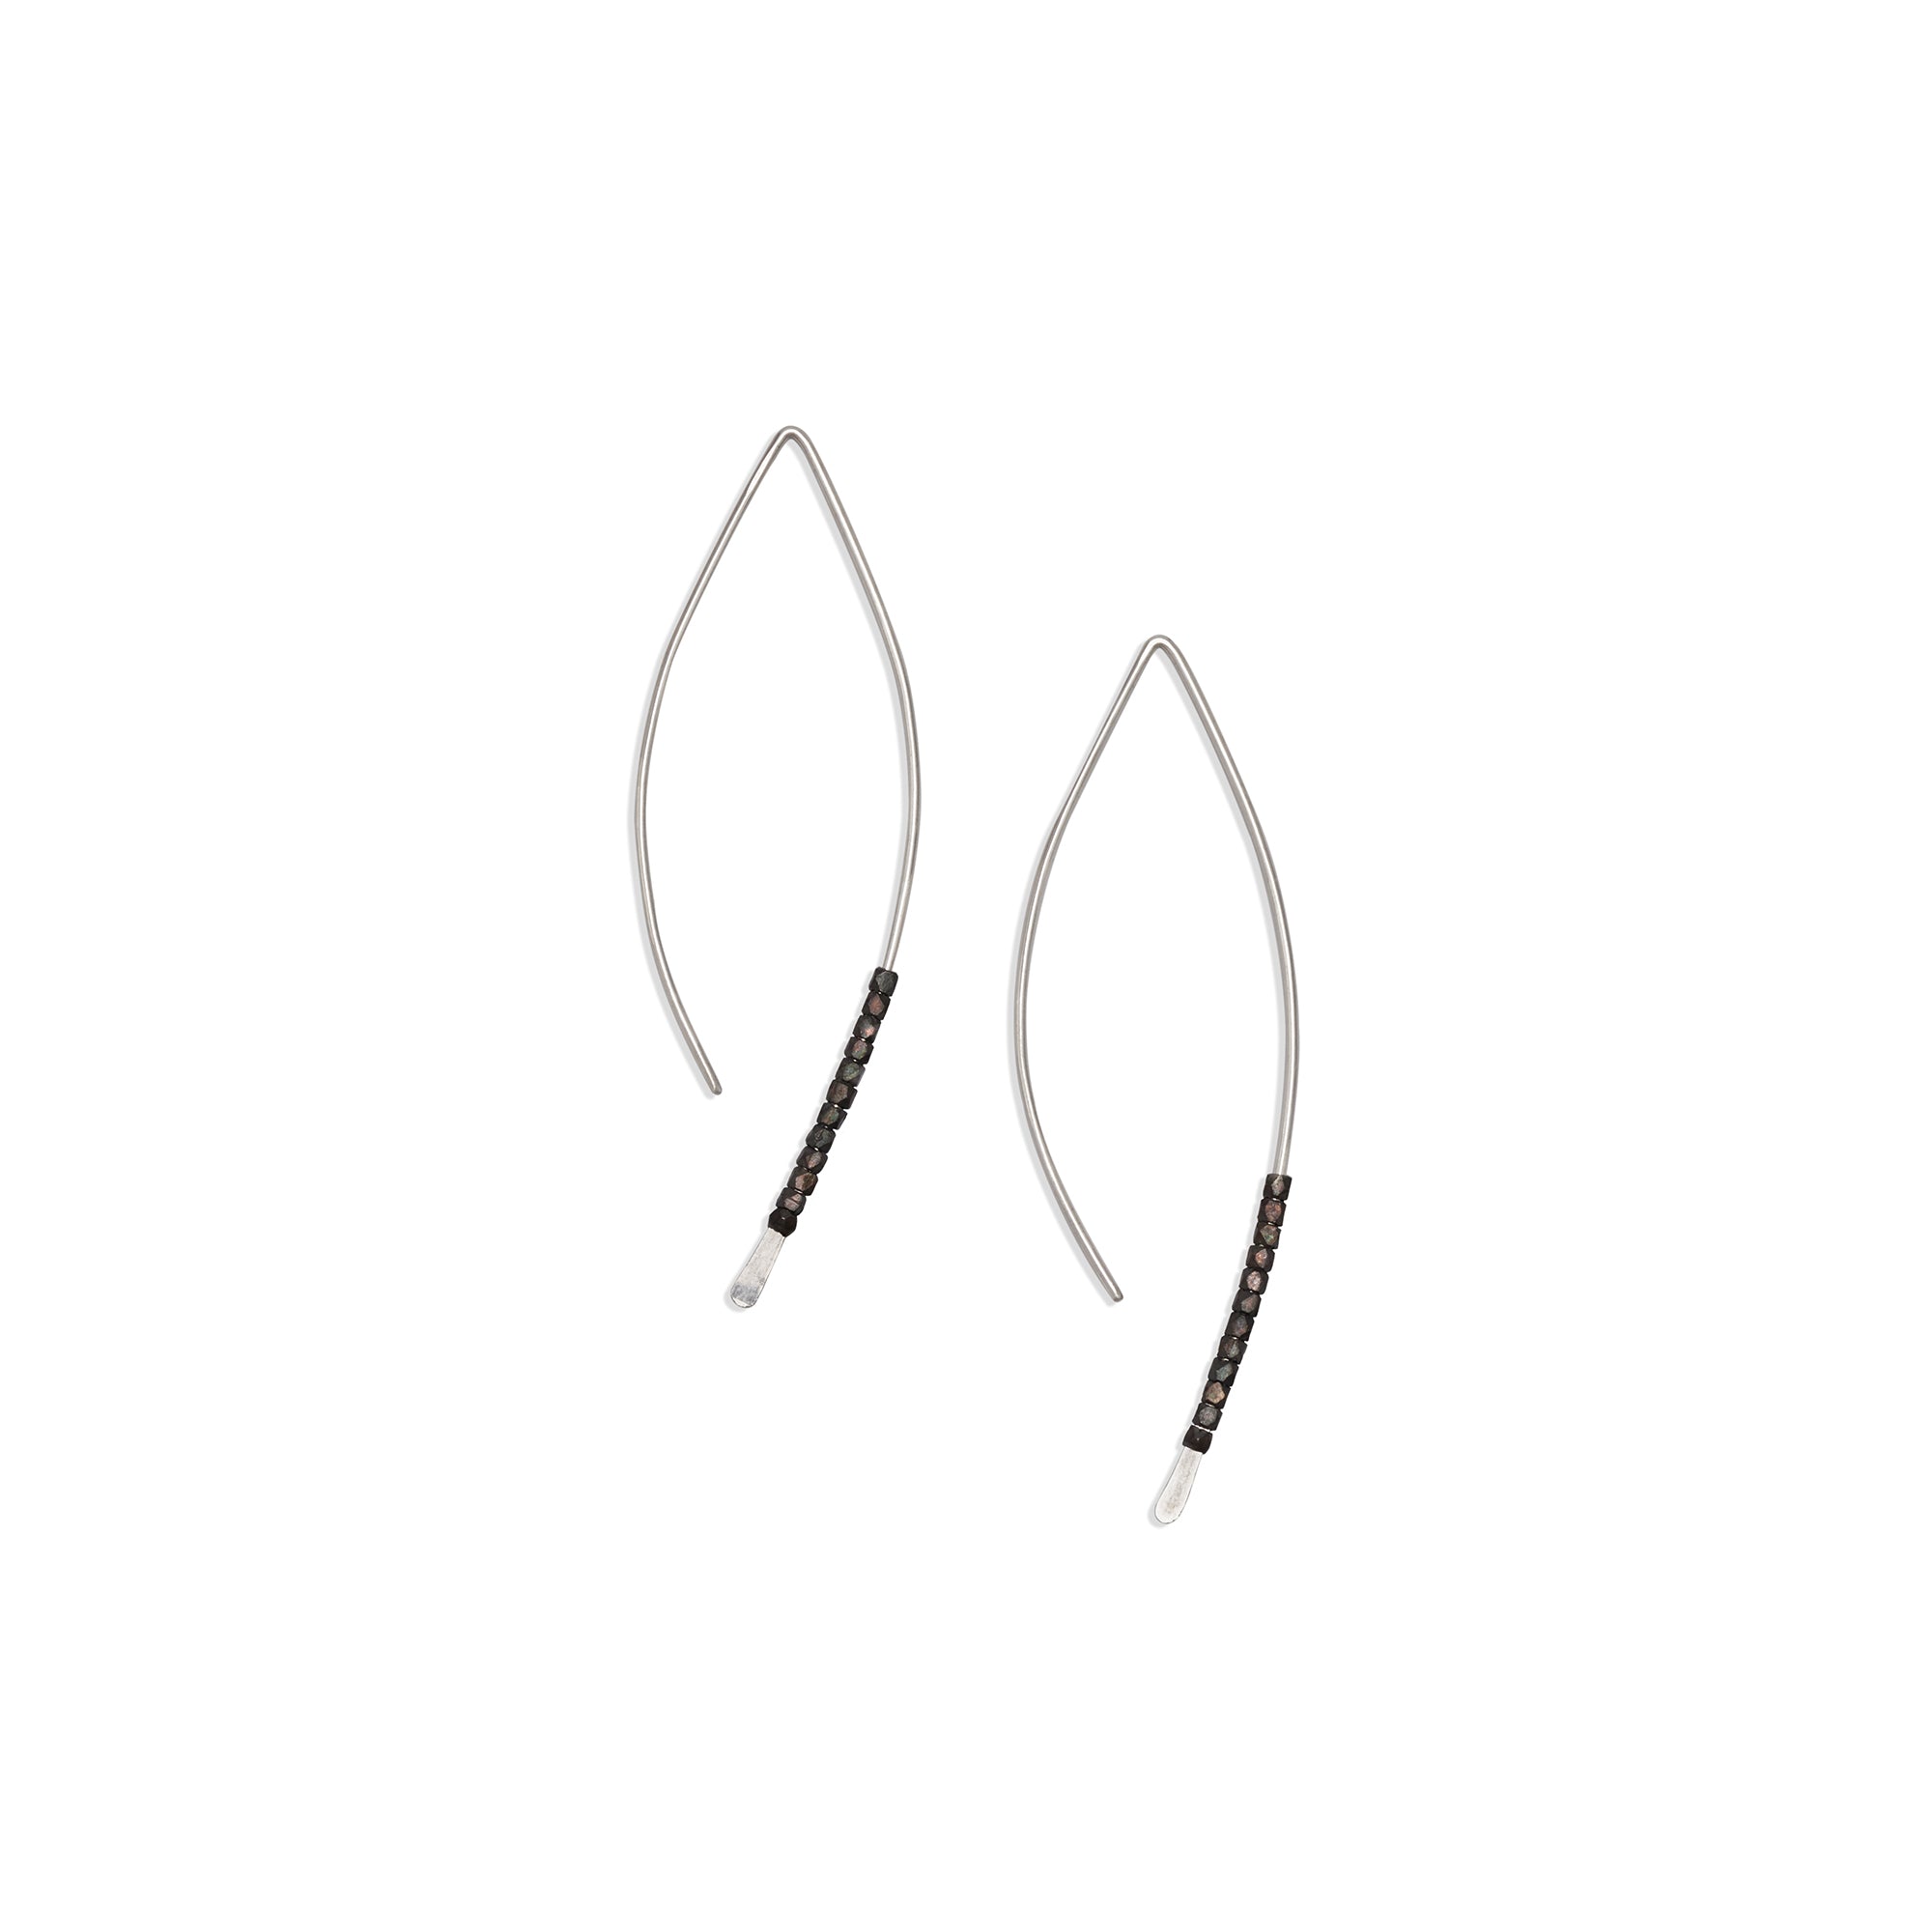 The Bead Crescent Earrings feature a thin, hammered wire adorned with oxidized sterling silver beads 